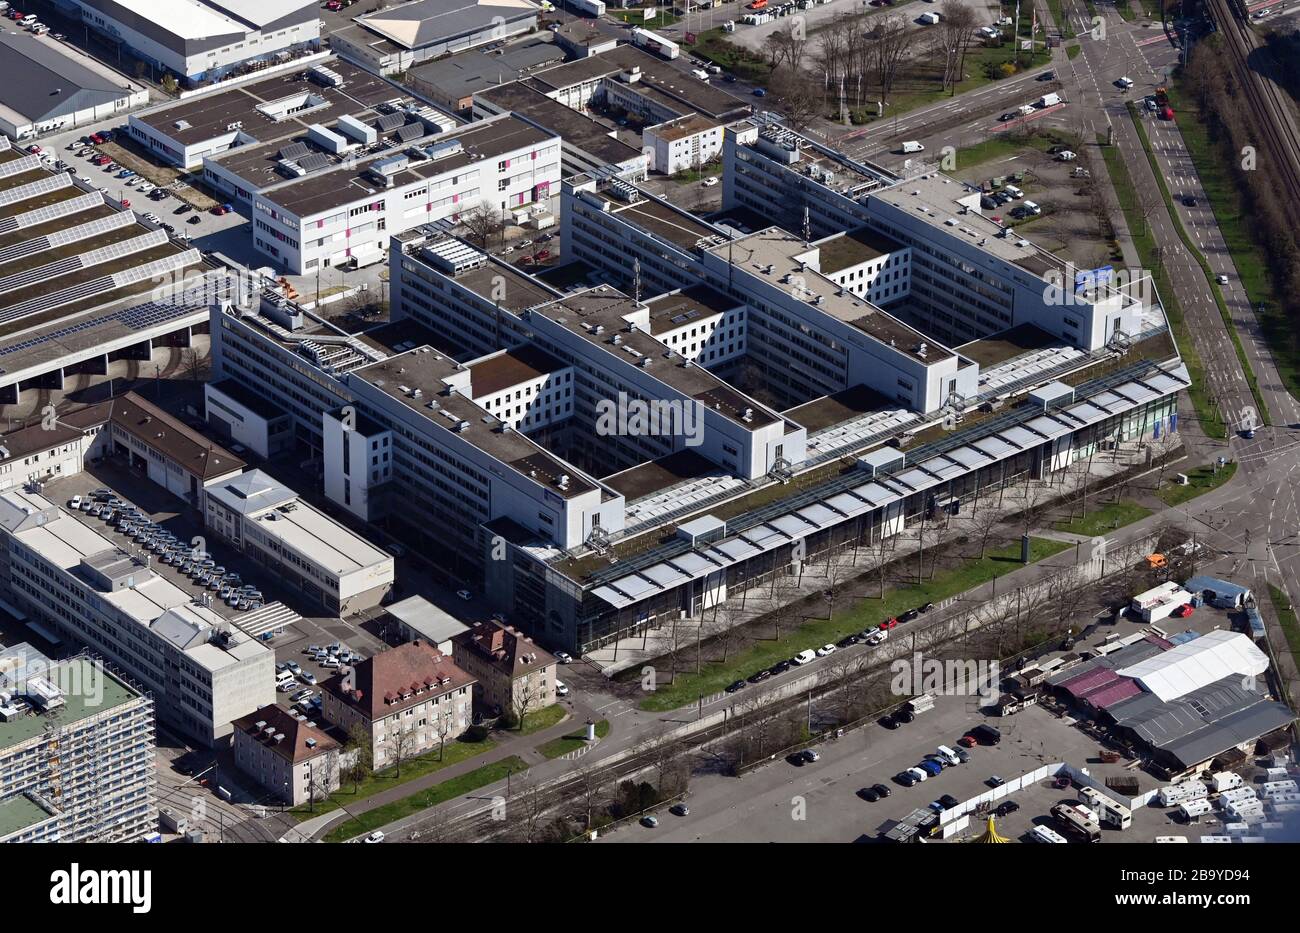 Karlsruhe, Germany. 24th Mar, 2020. Aerial photograph, taken from an airplane, of the headquarters of the energy supplier Energie Baden-Württemberg (EnBW). Credit: Uli Deck/dpa/Alamy Live News Stock Photo